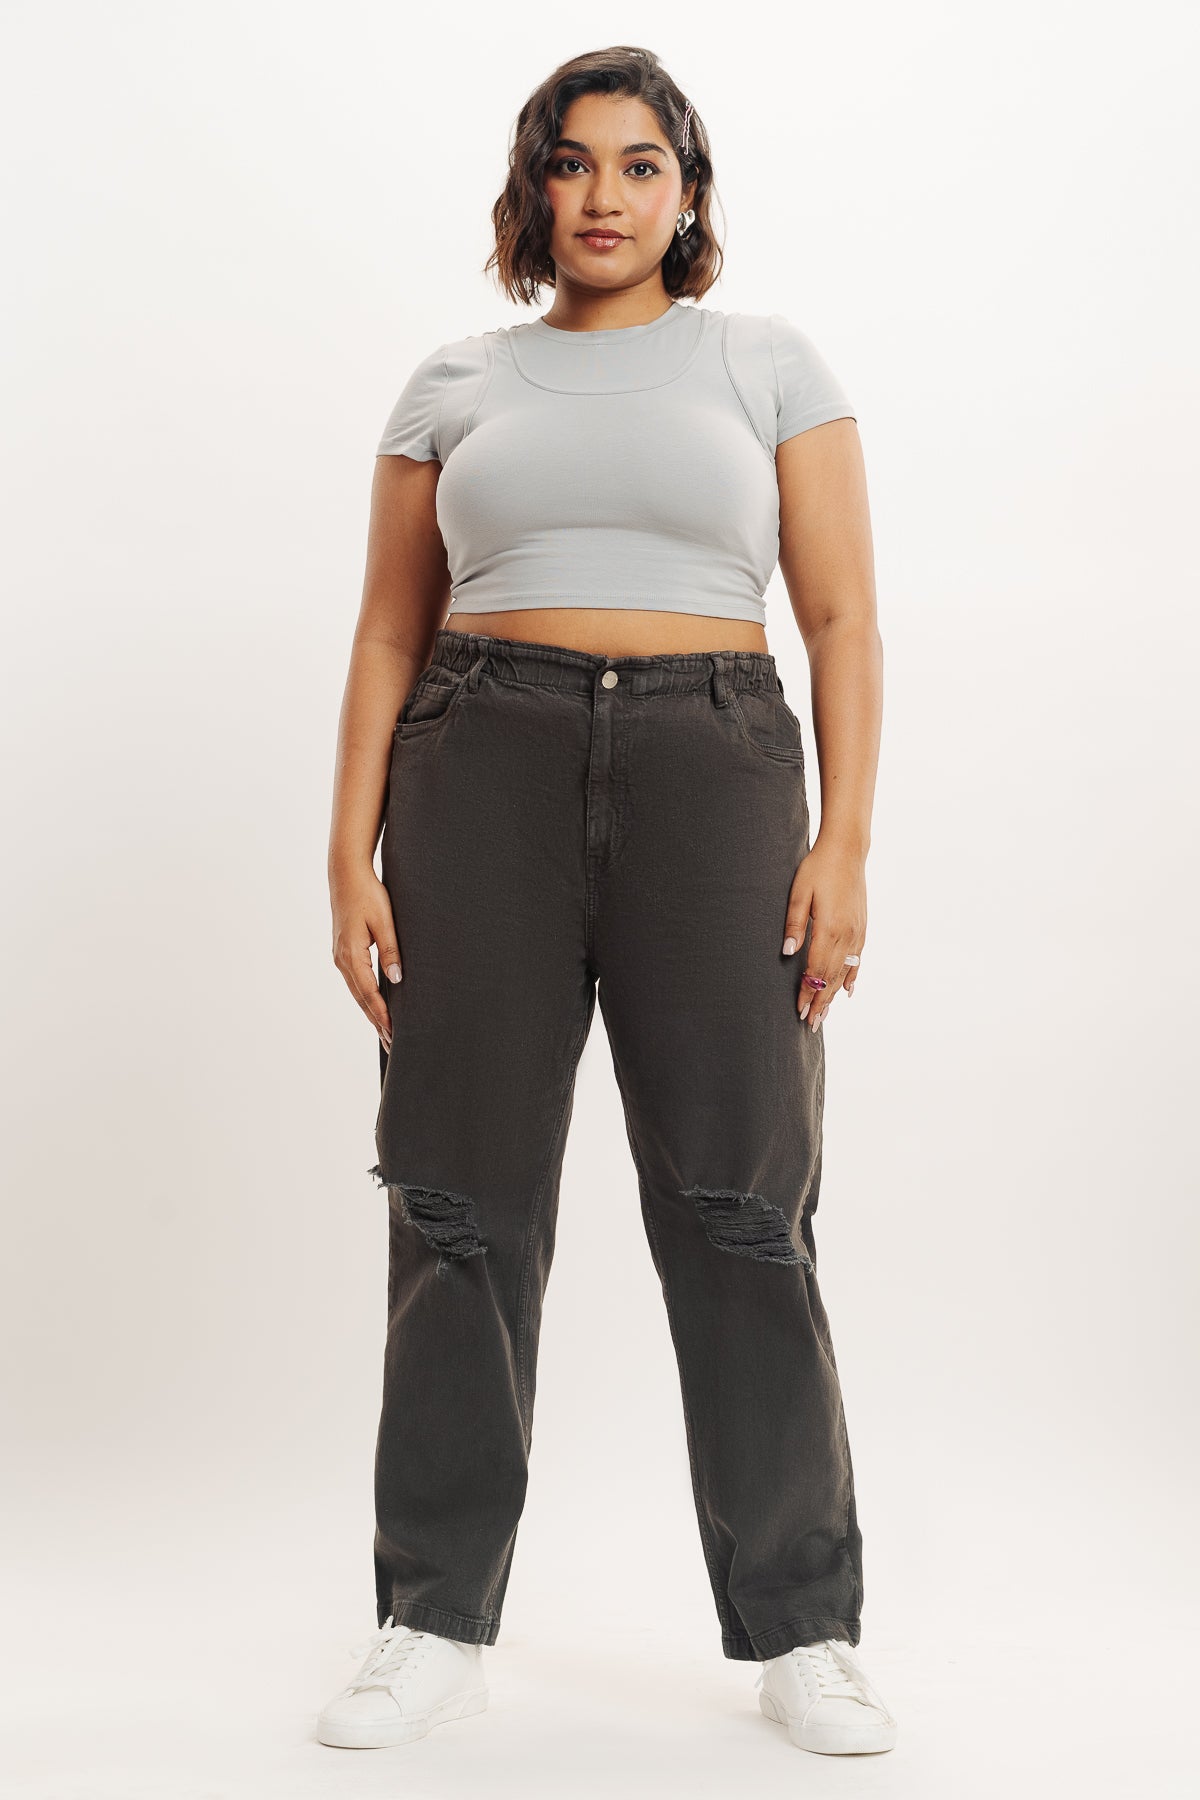 OLIVE DISTRESS ELASTICATED MOM JEANS